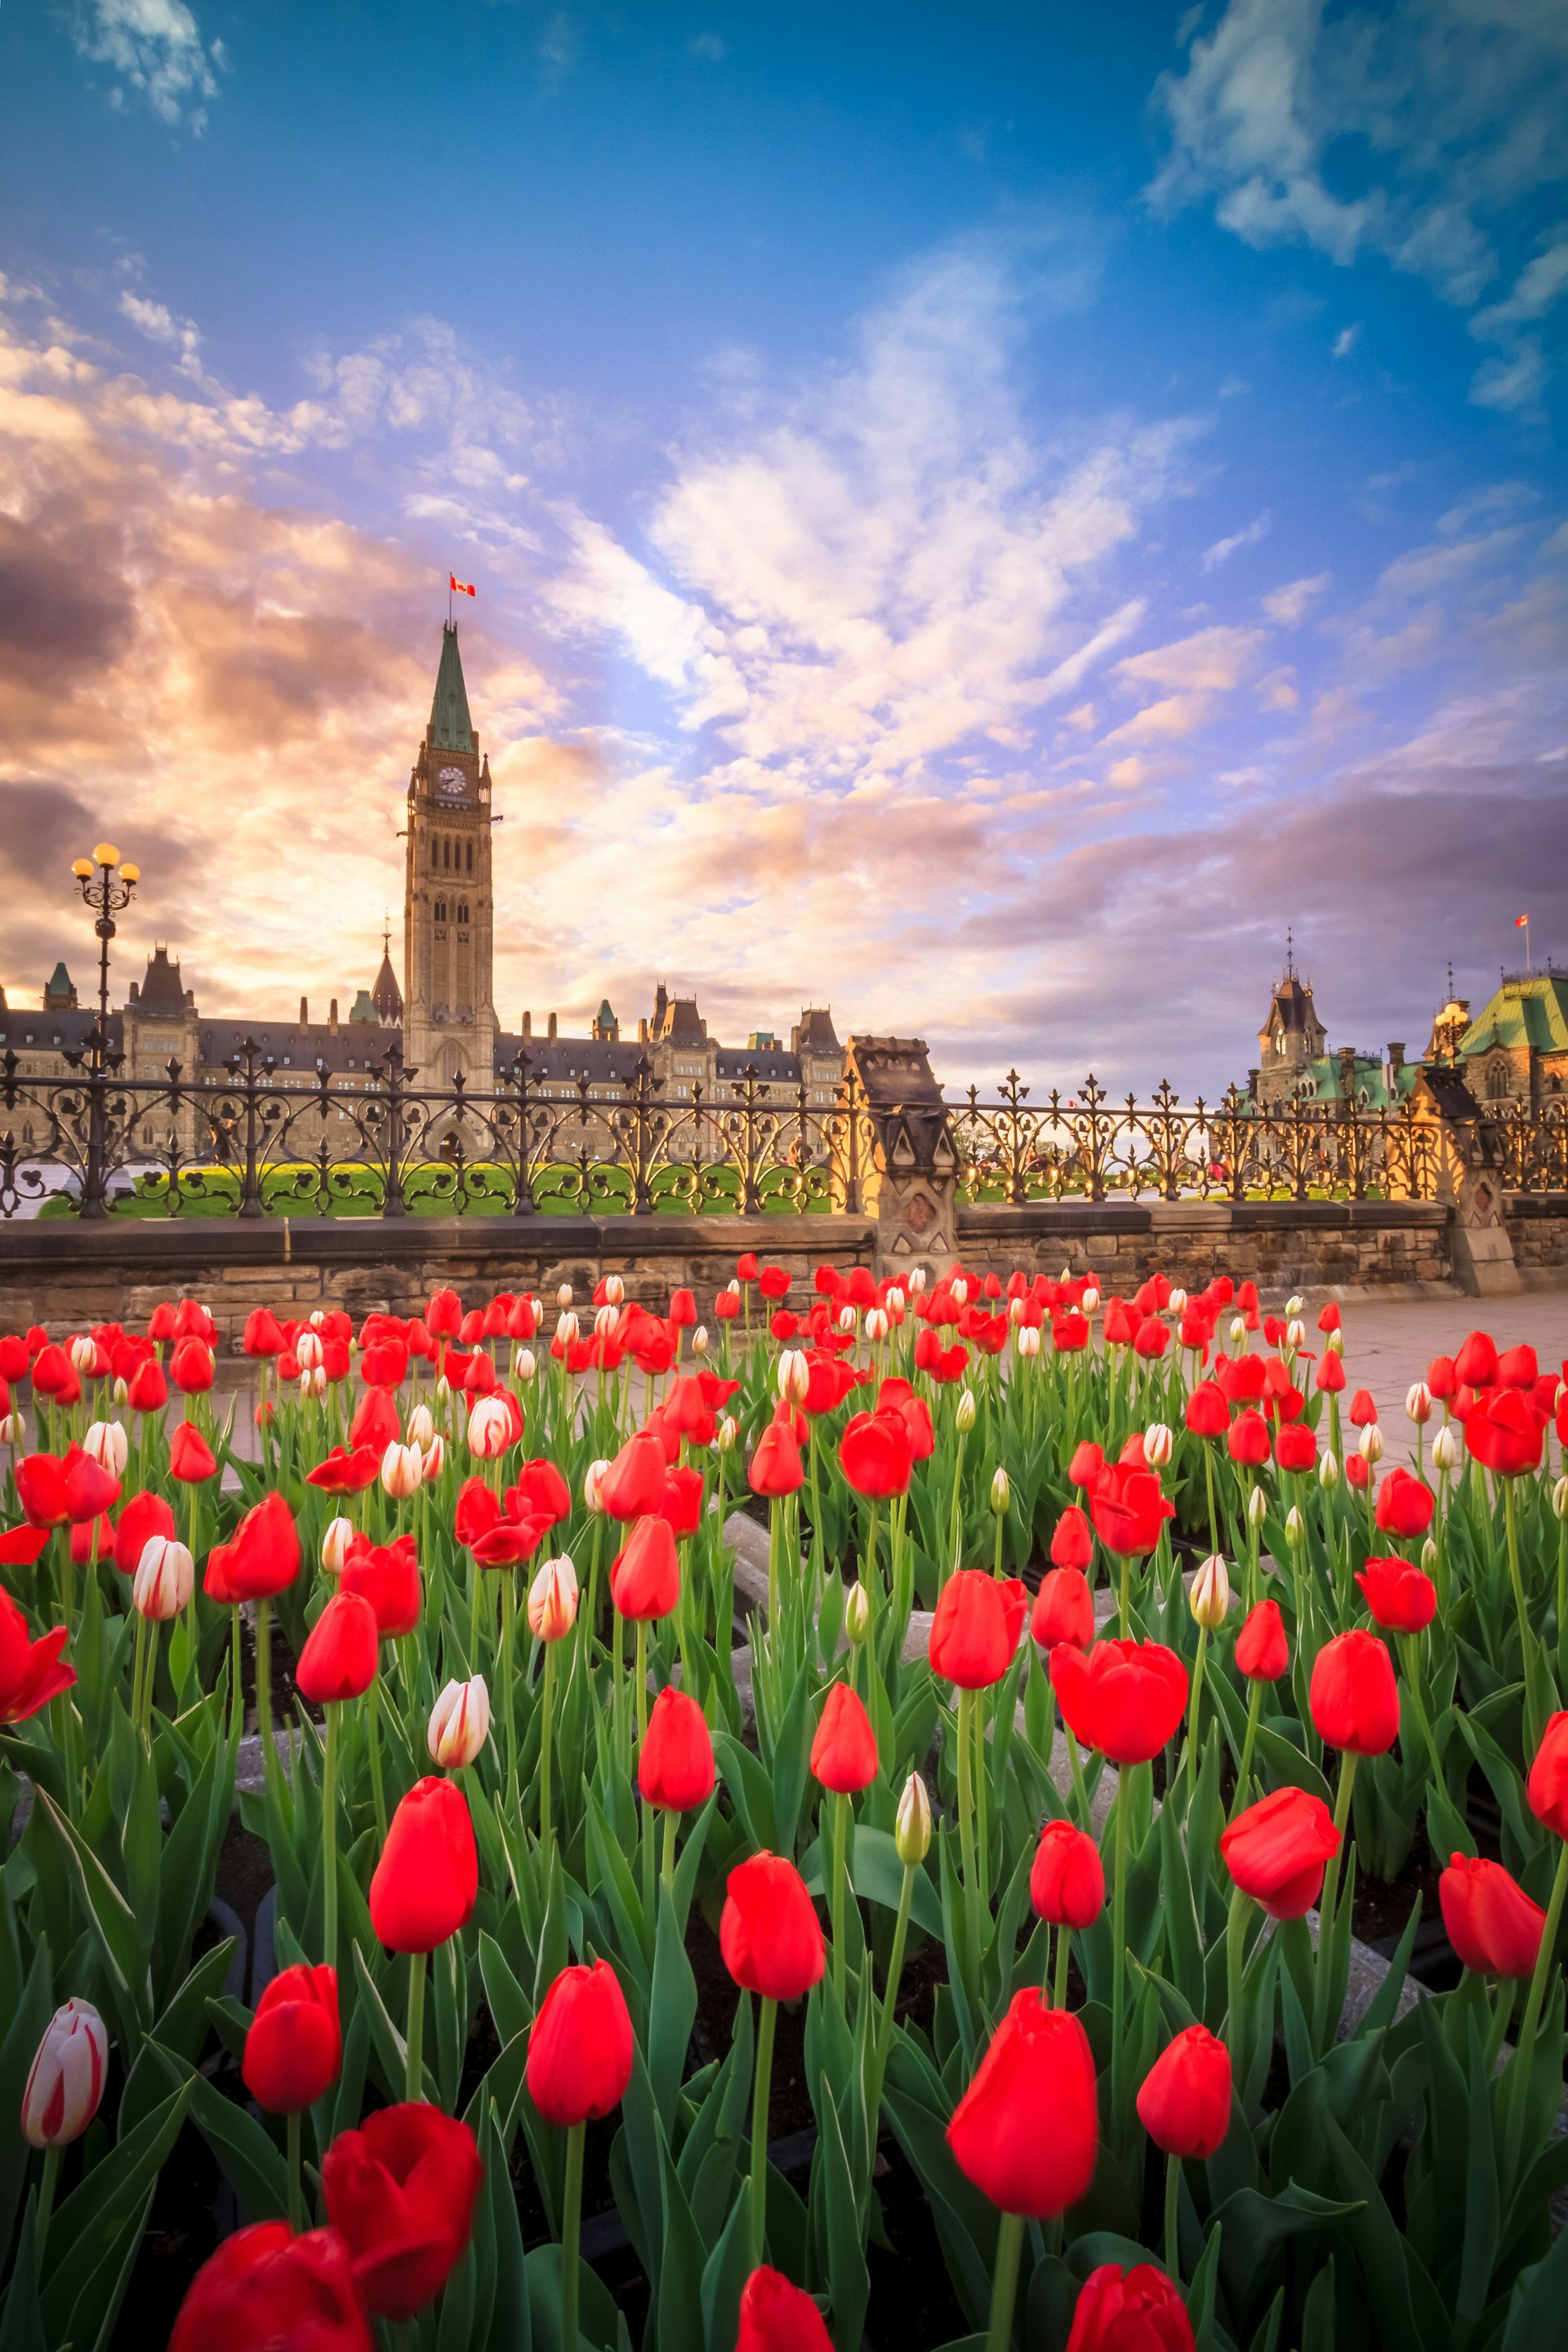 A large Gothic-style parliament building with the sun rising behind it and a flower bed packed with red tulips in the foreground